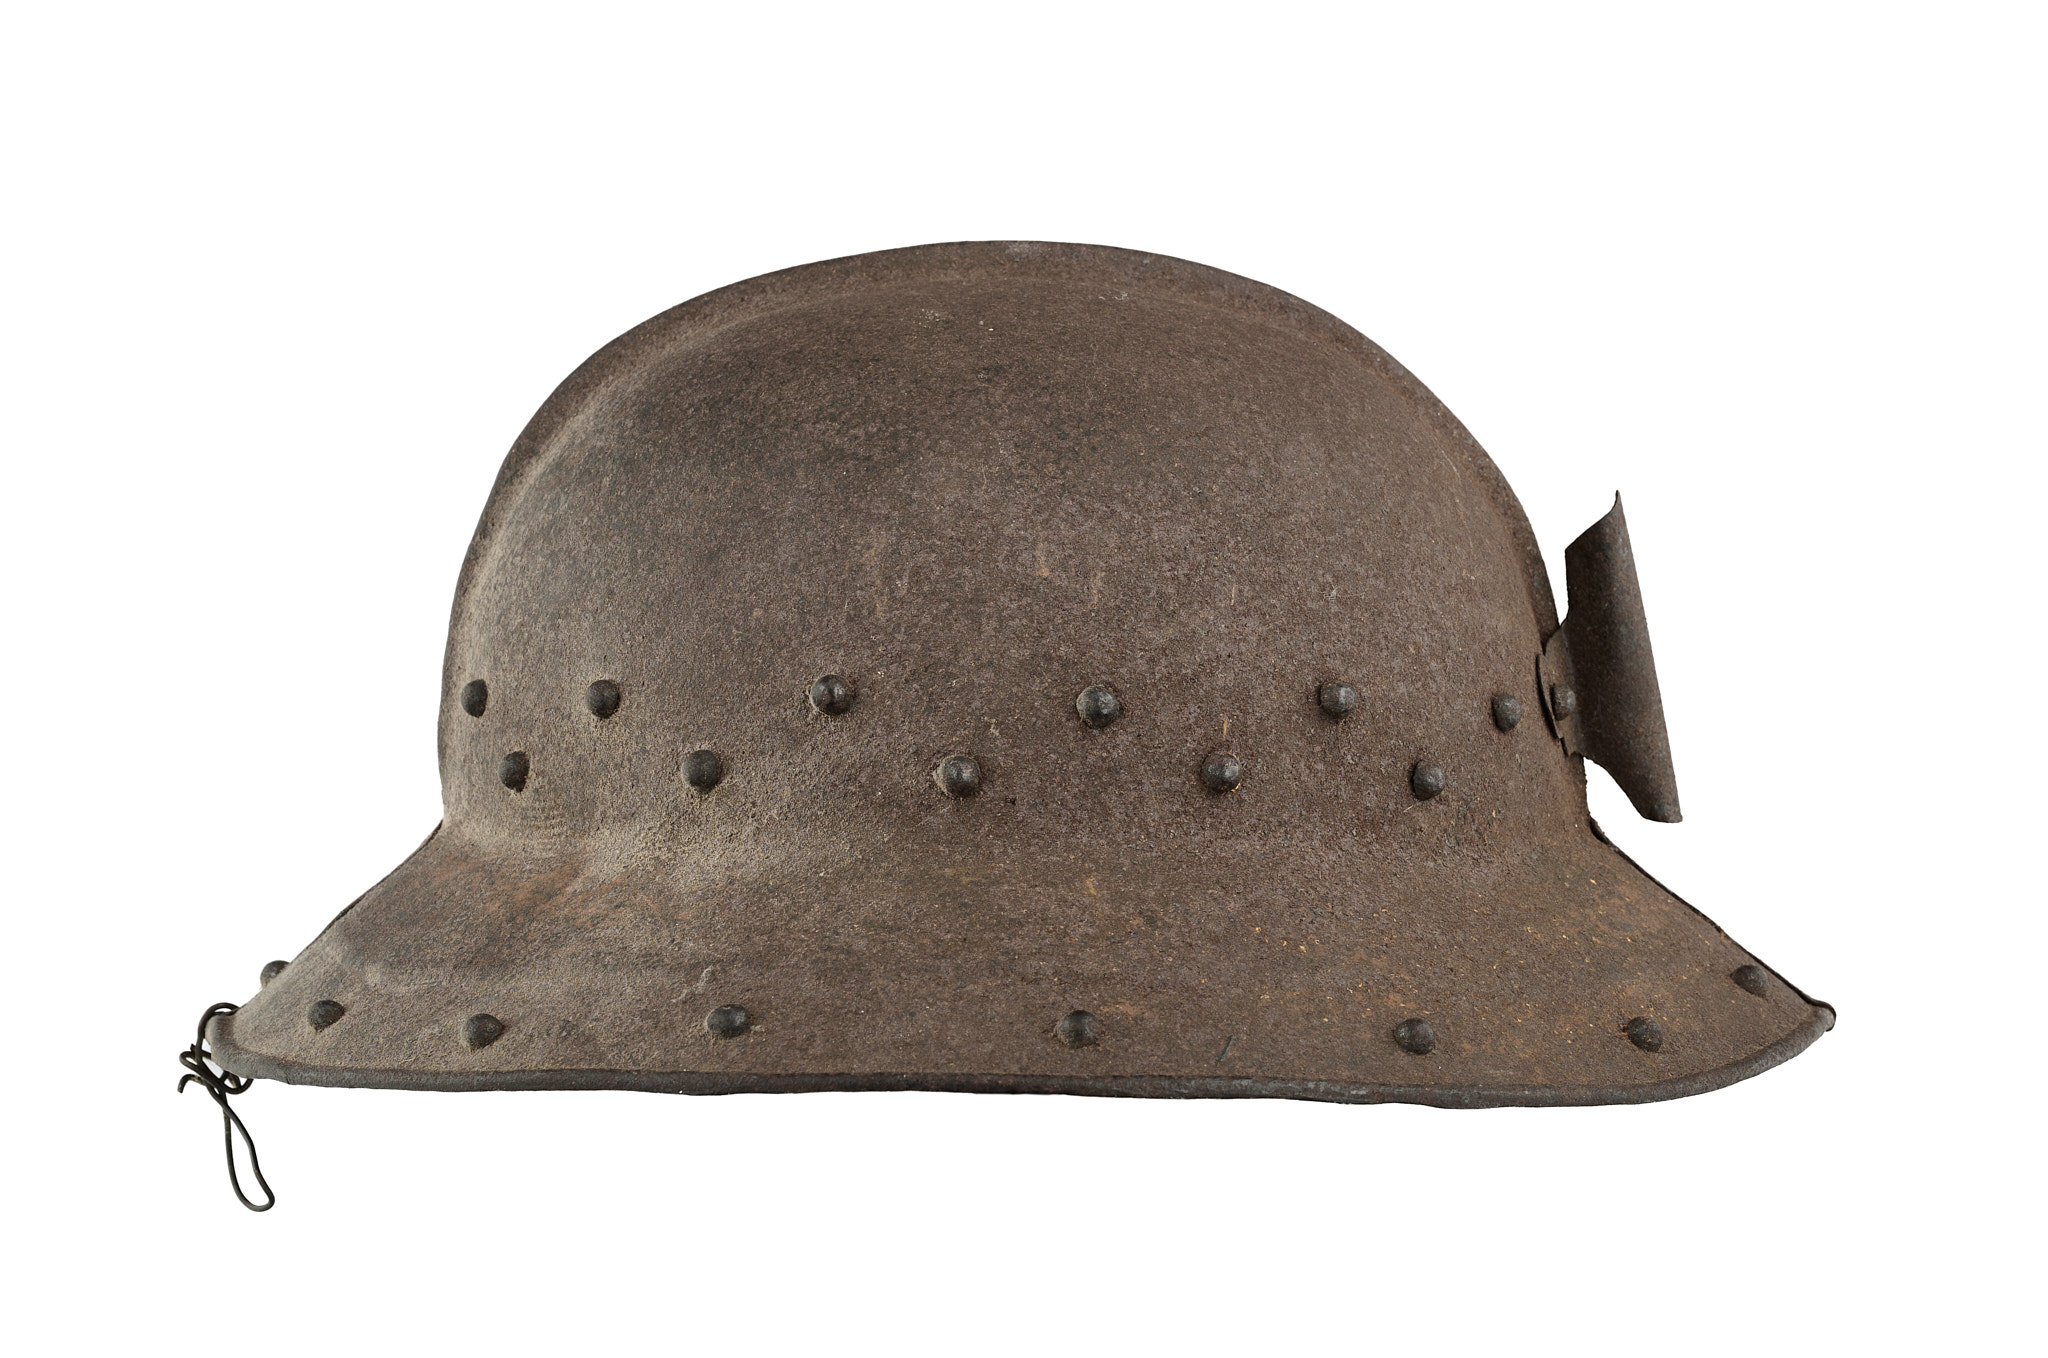 A PIKEMAN'S POT HELMET IN THE ENGLISH STYLE OF CIRCA 1630, 20TH CENTURY